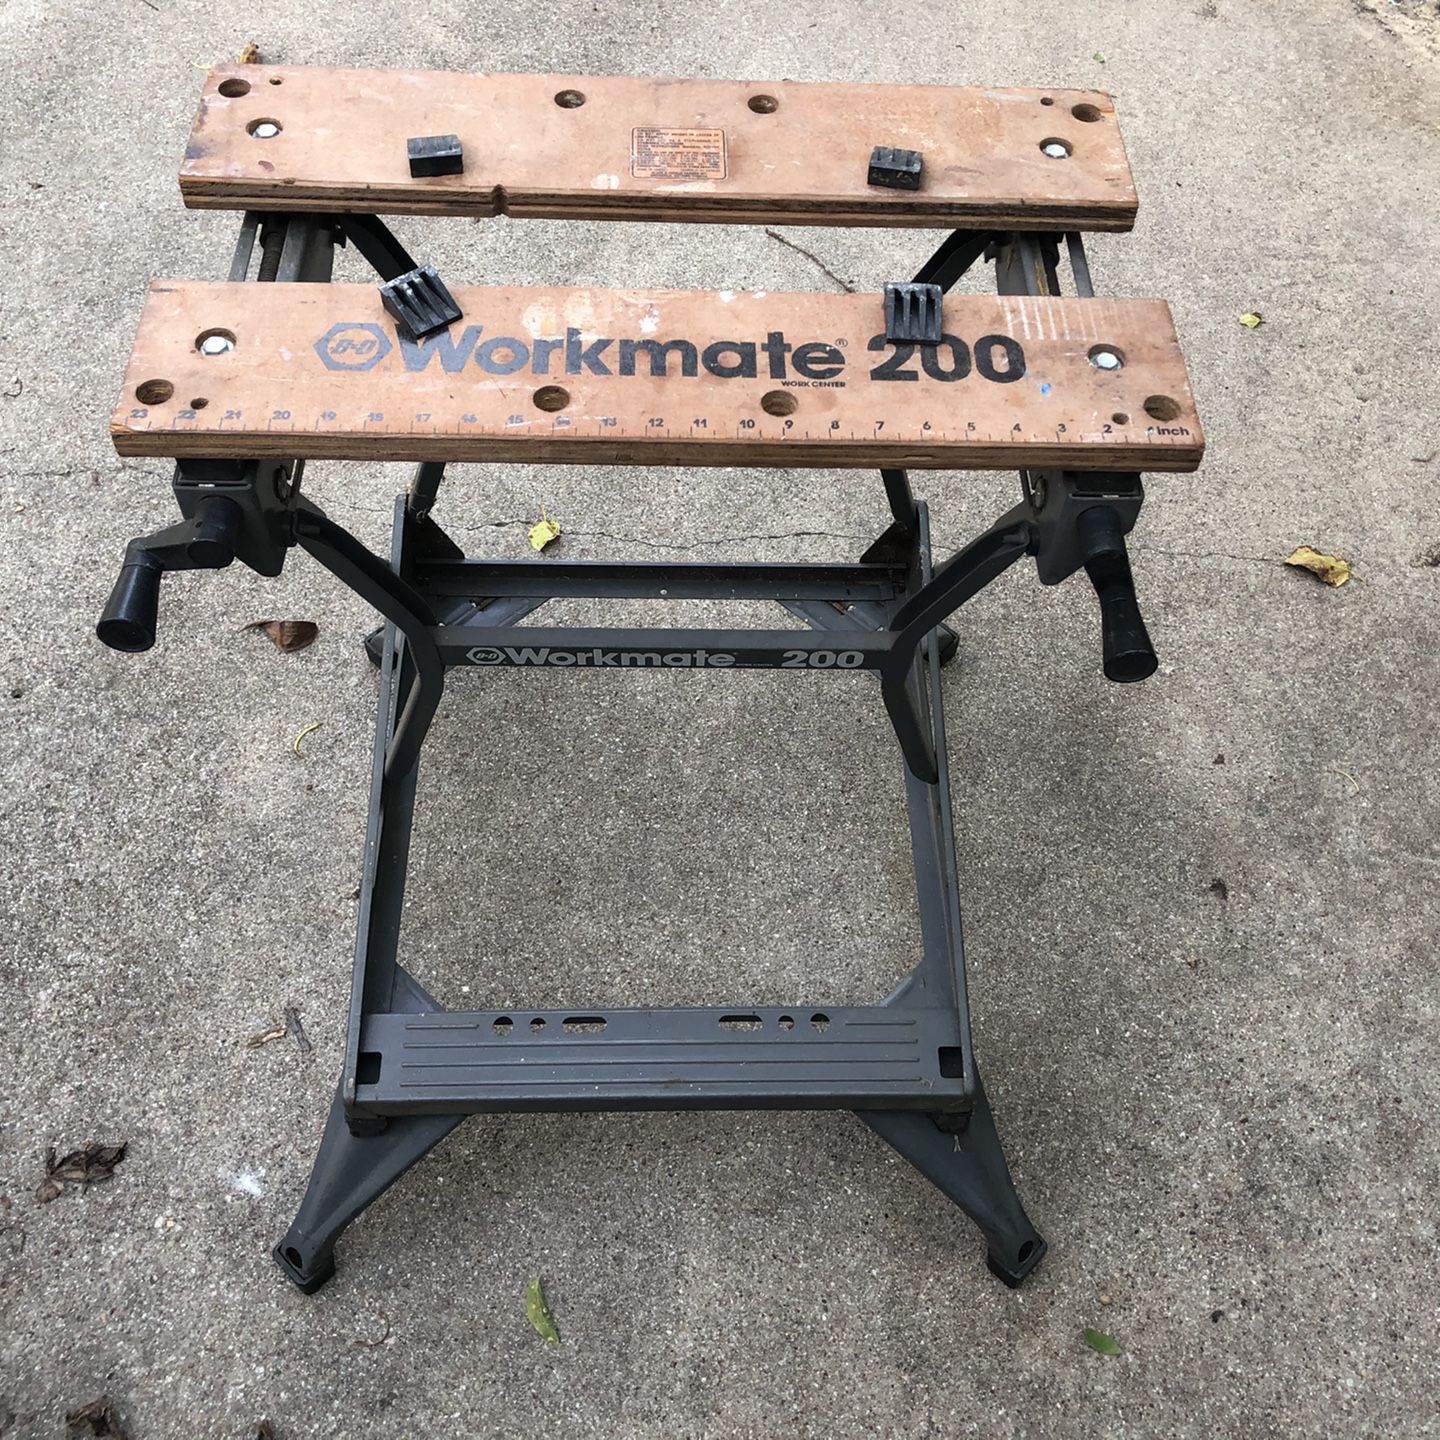 B&D Workmate 200 for Sale in Dallas, TX - OfferUp